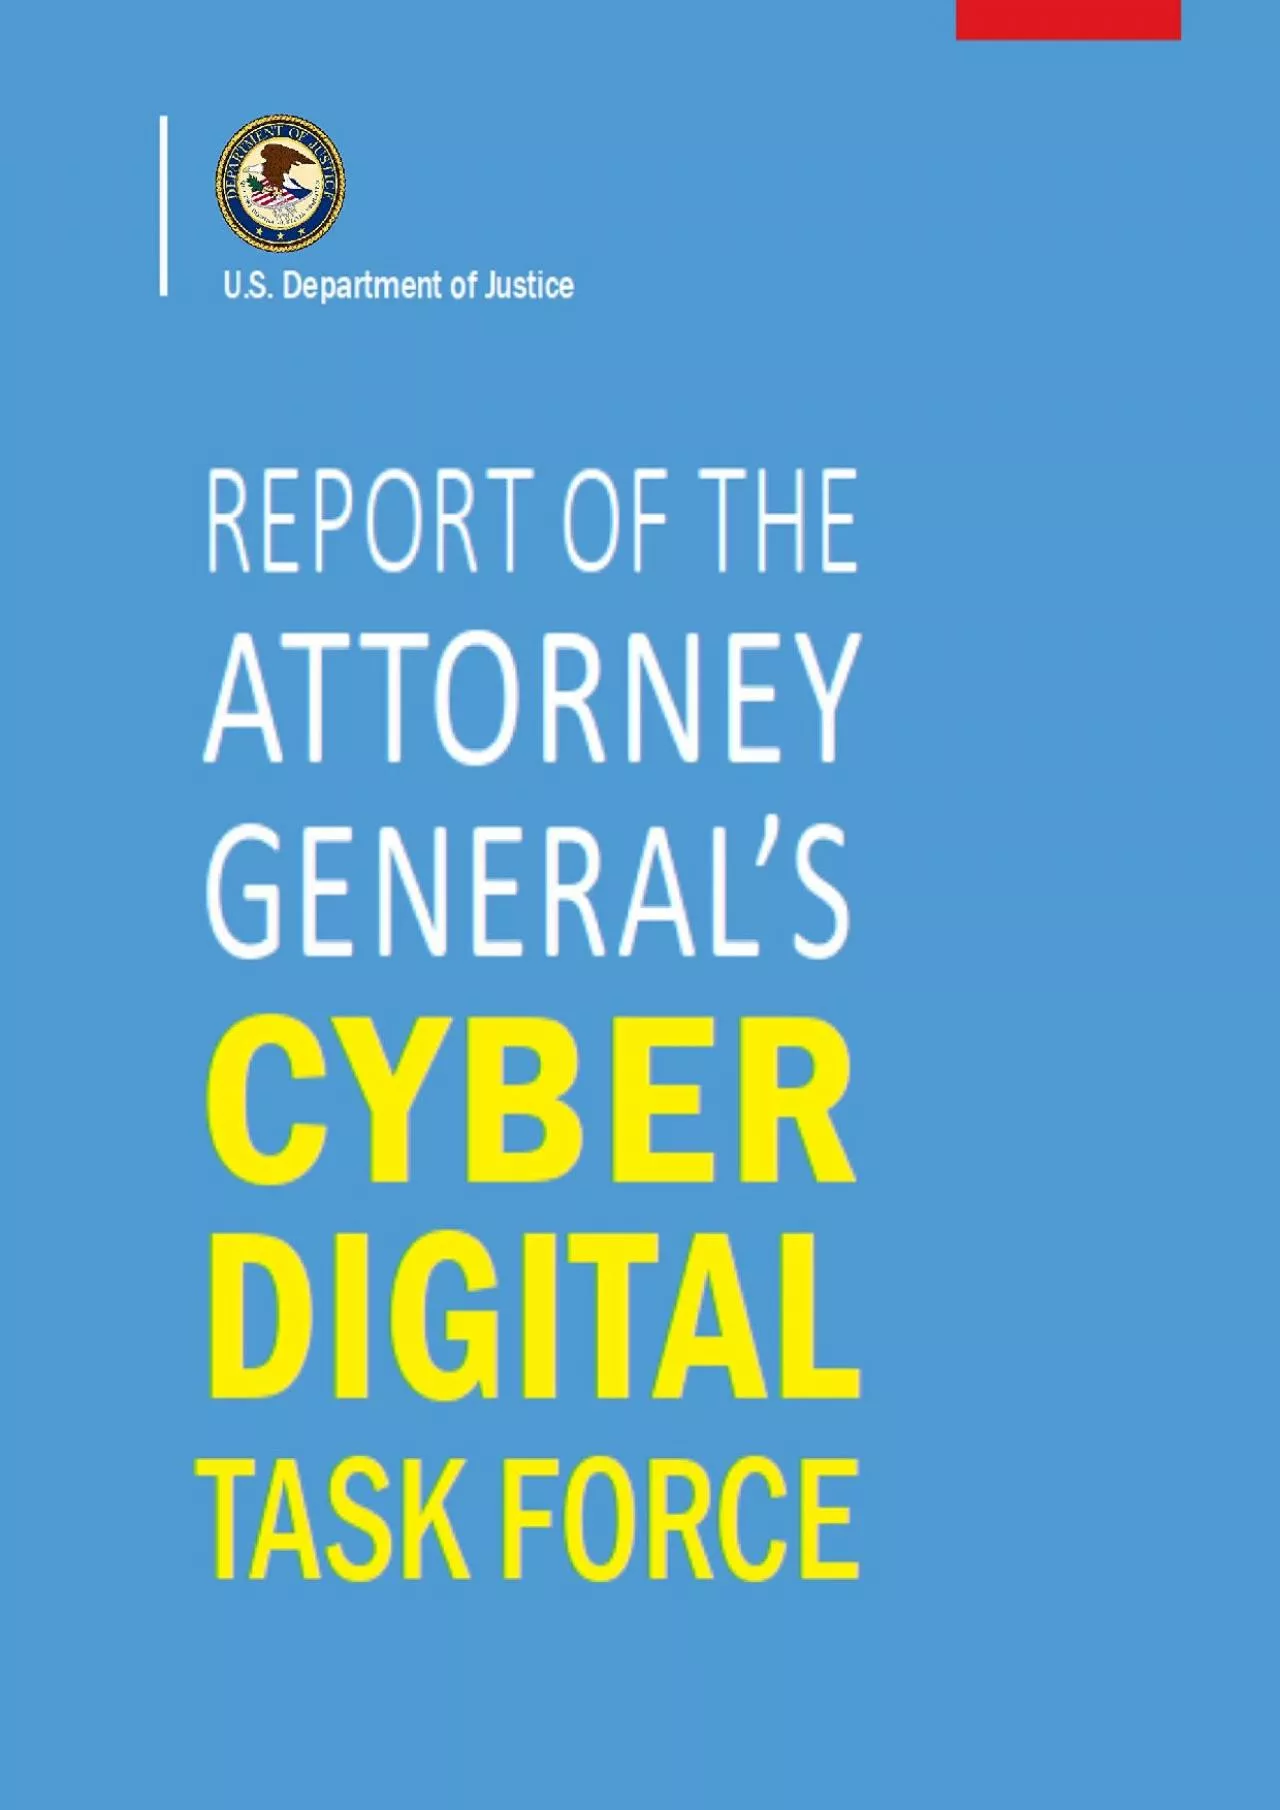 [READING BOOK]-Report of The Attorney General’s Cyber Digital Task Force: 2018